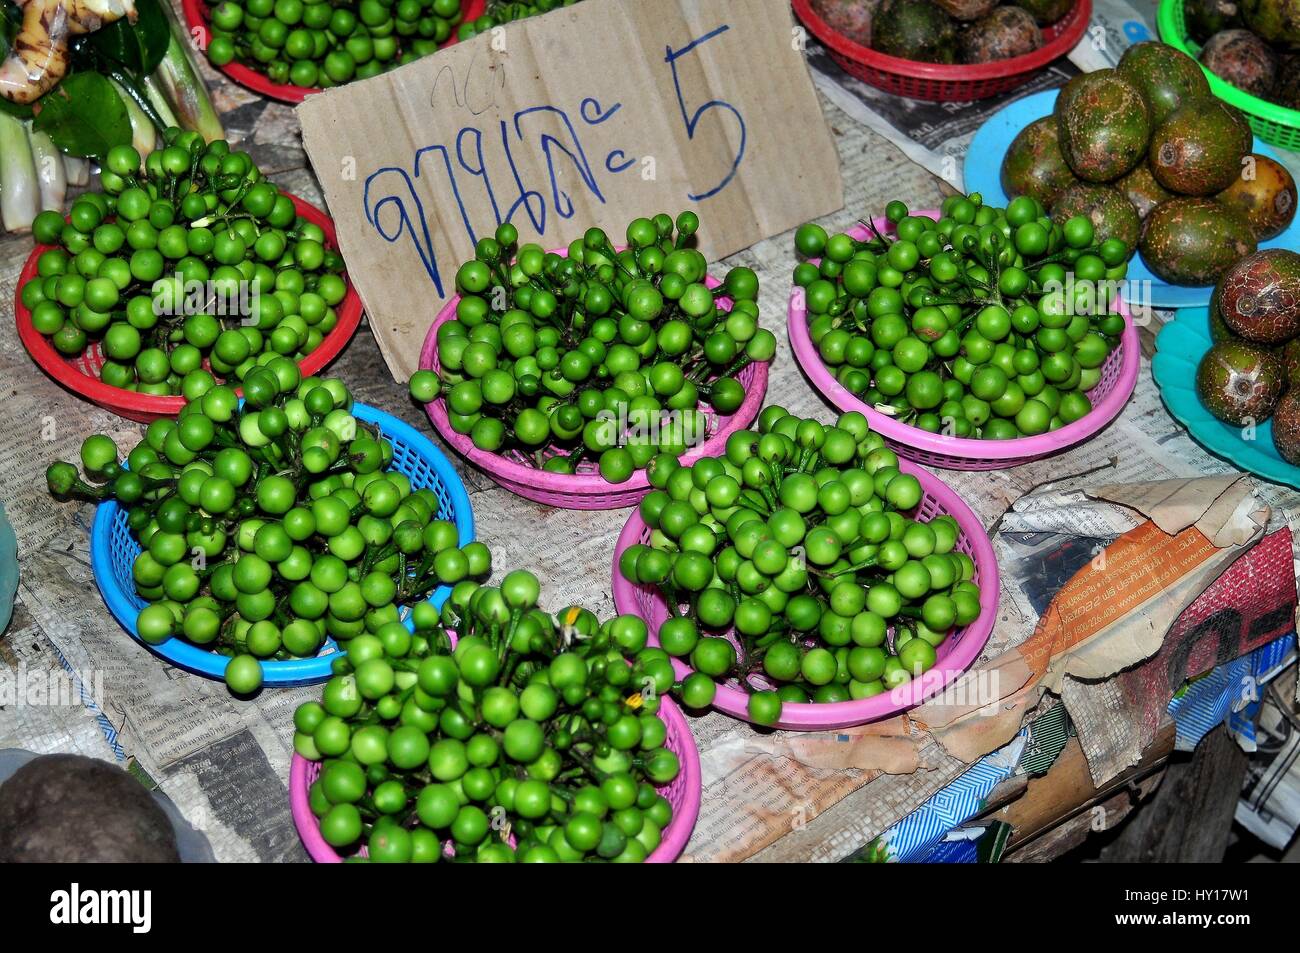 Lamphun, Thailand - December 28, 2012:  Dishes of green Makhan, small Asian eggplants, are displayed in dishes at the Mea Tha Market Stock Photo